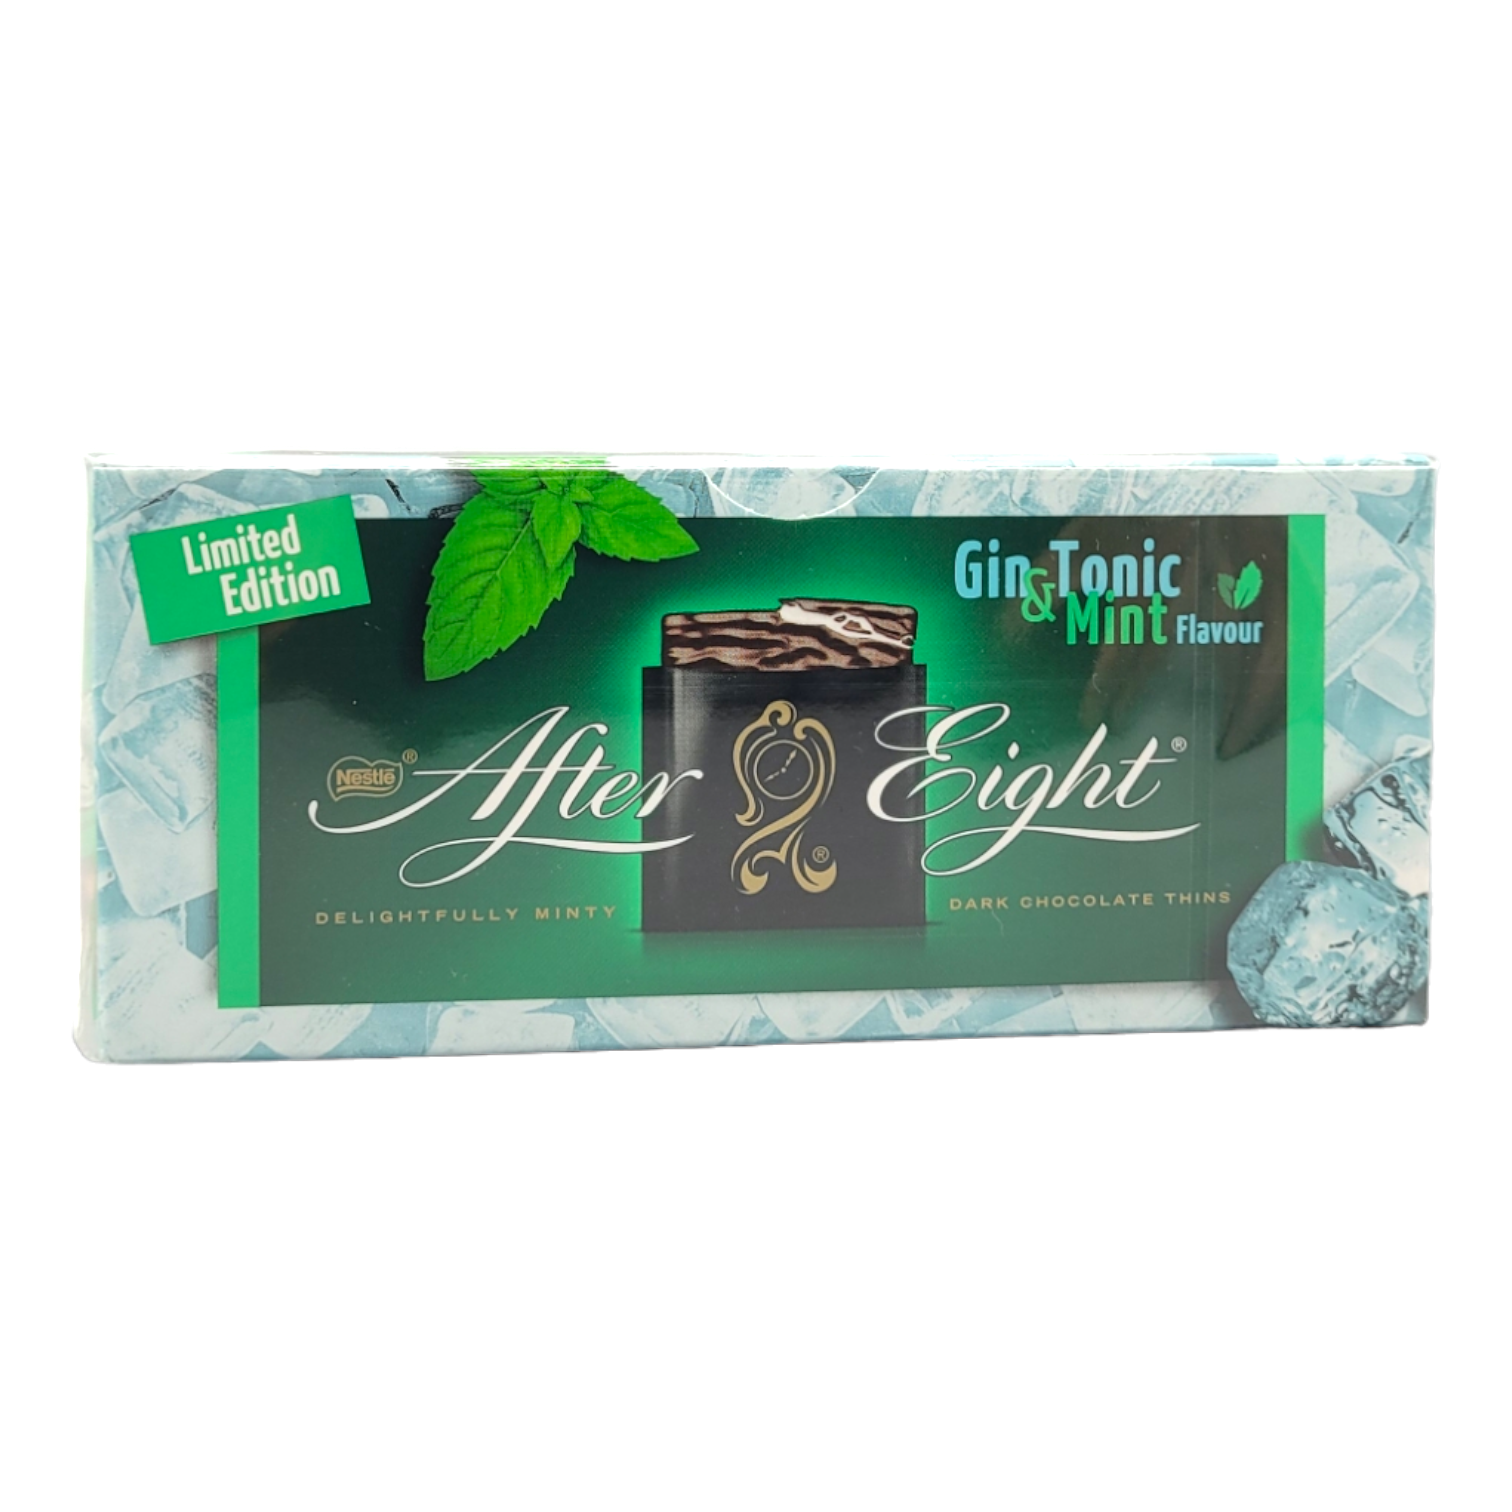 Nestle After Eight Gin and tonic, 200g